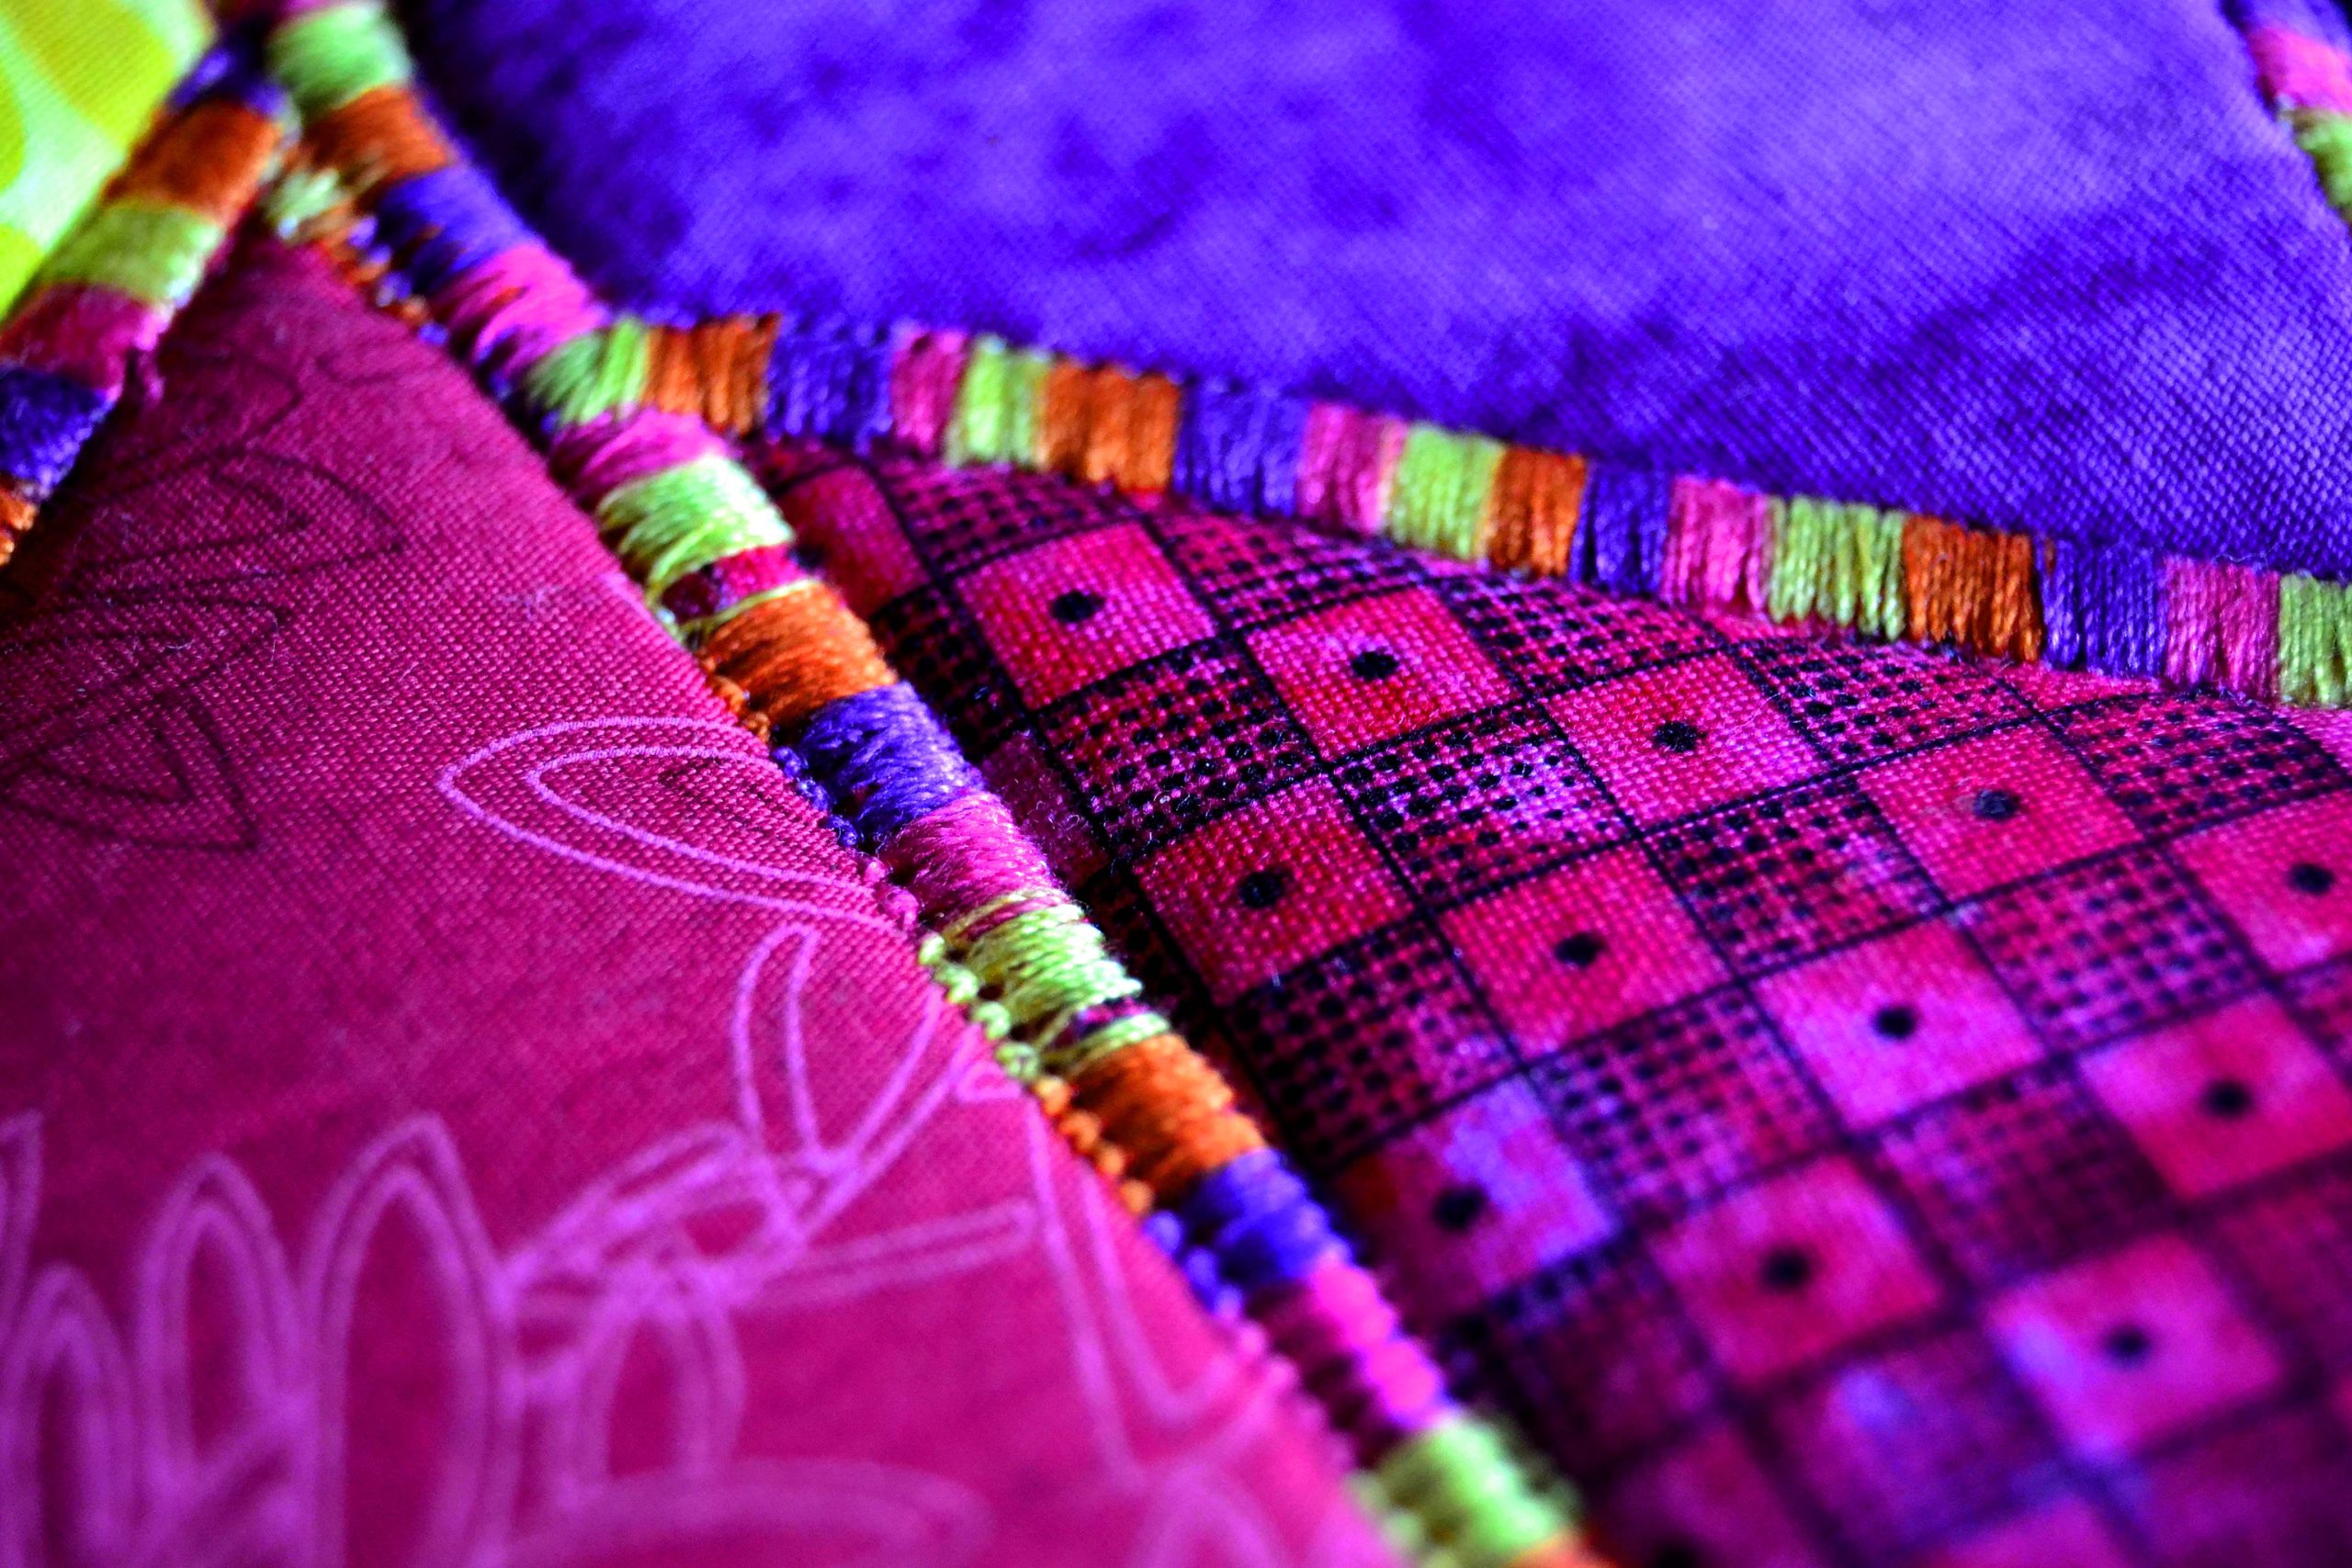 Variegated Thread on a purple and pink fabric art quilt